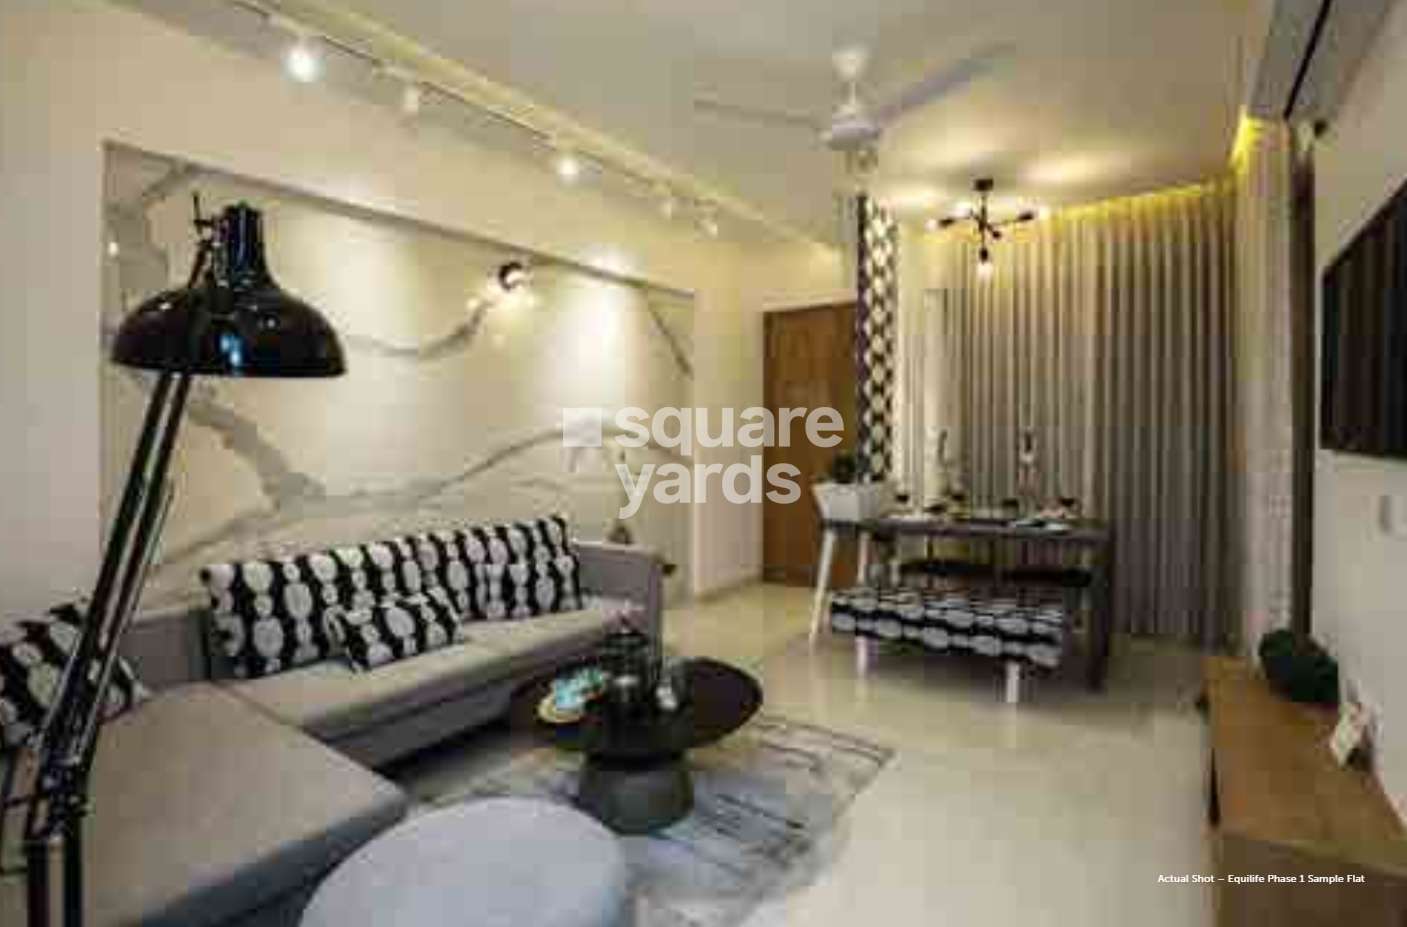 pristine equilife homes project apartment interiors1